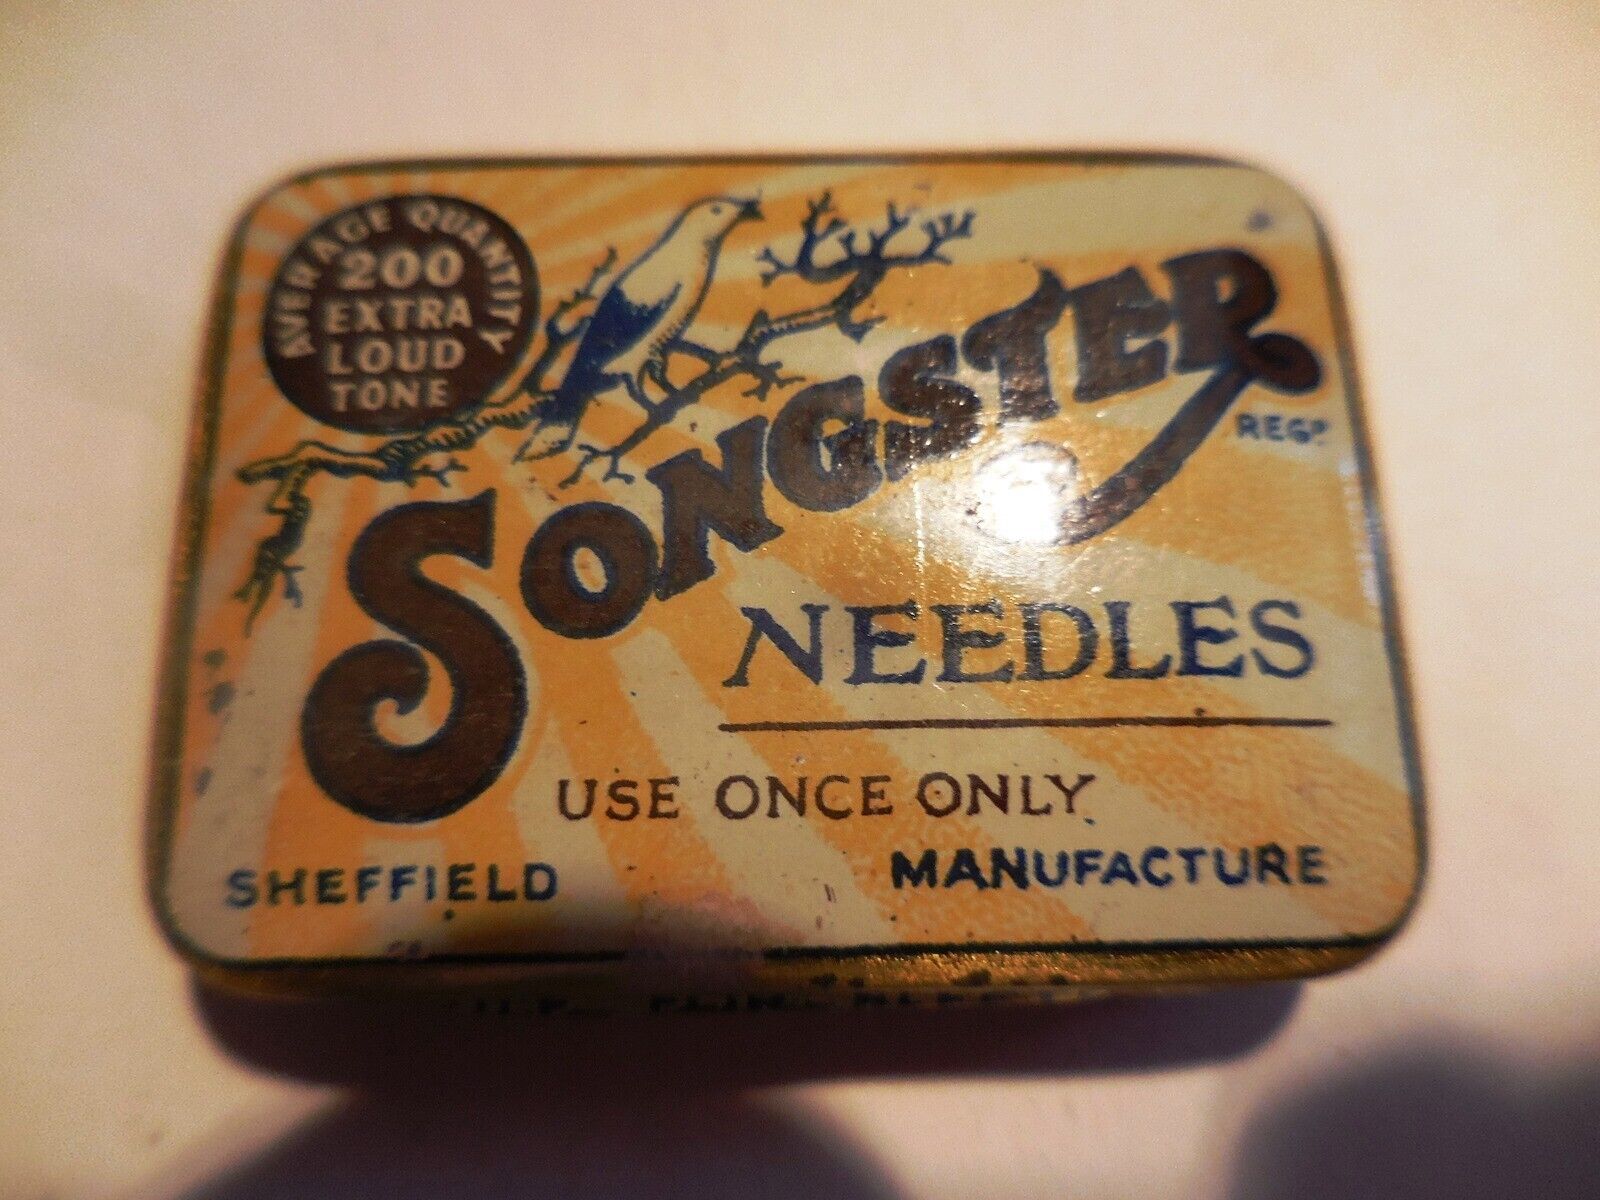 SONGSTER British Steel 200 EXTRA LOUD NEEDLE TIN SHEFFIELD Victrola GRAMOPHONE 